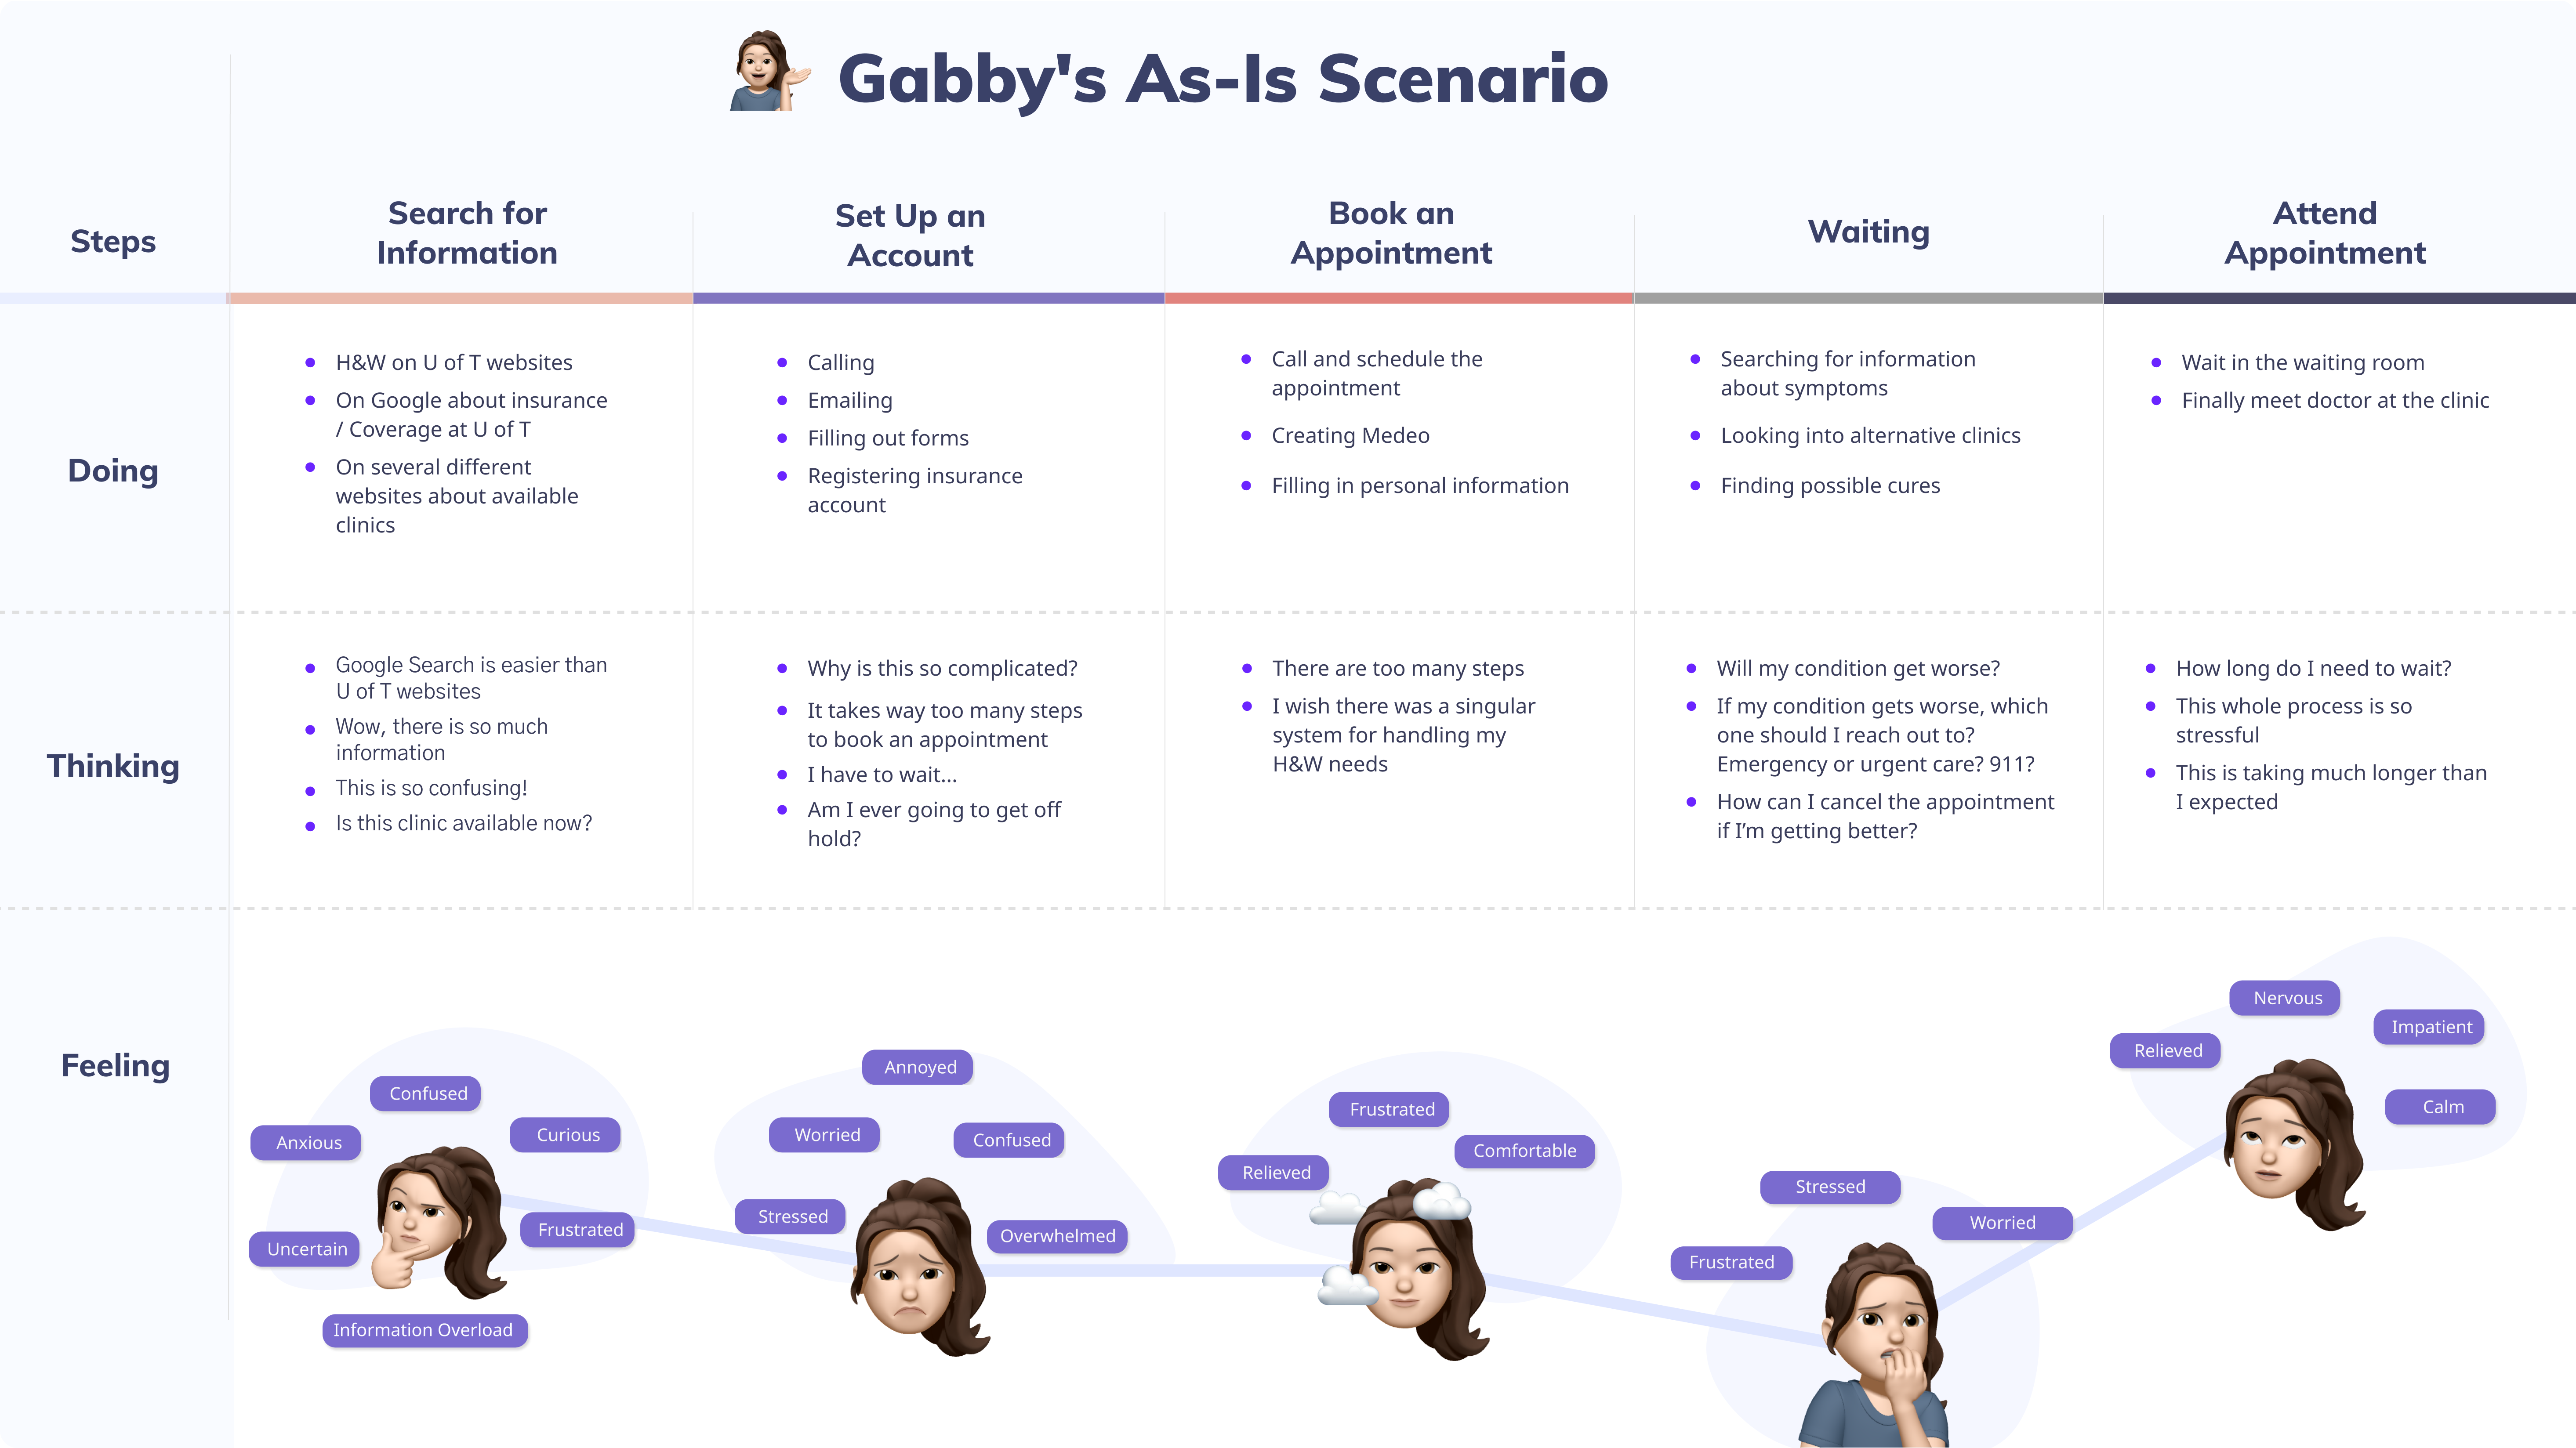 Gabby's current state (as-is) experience map